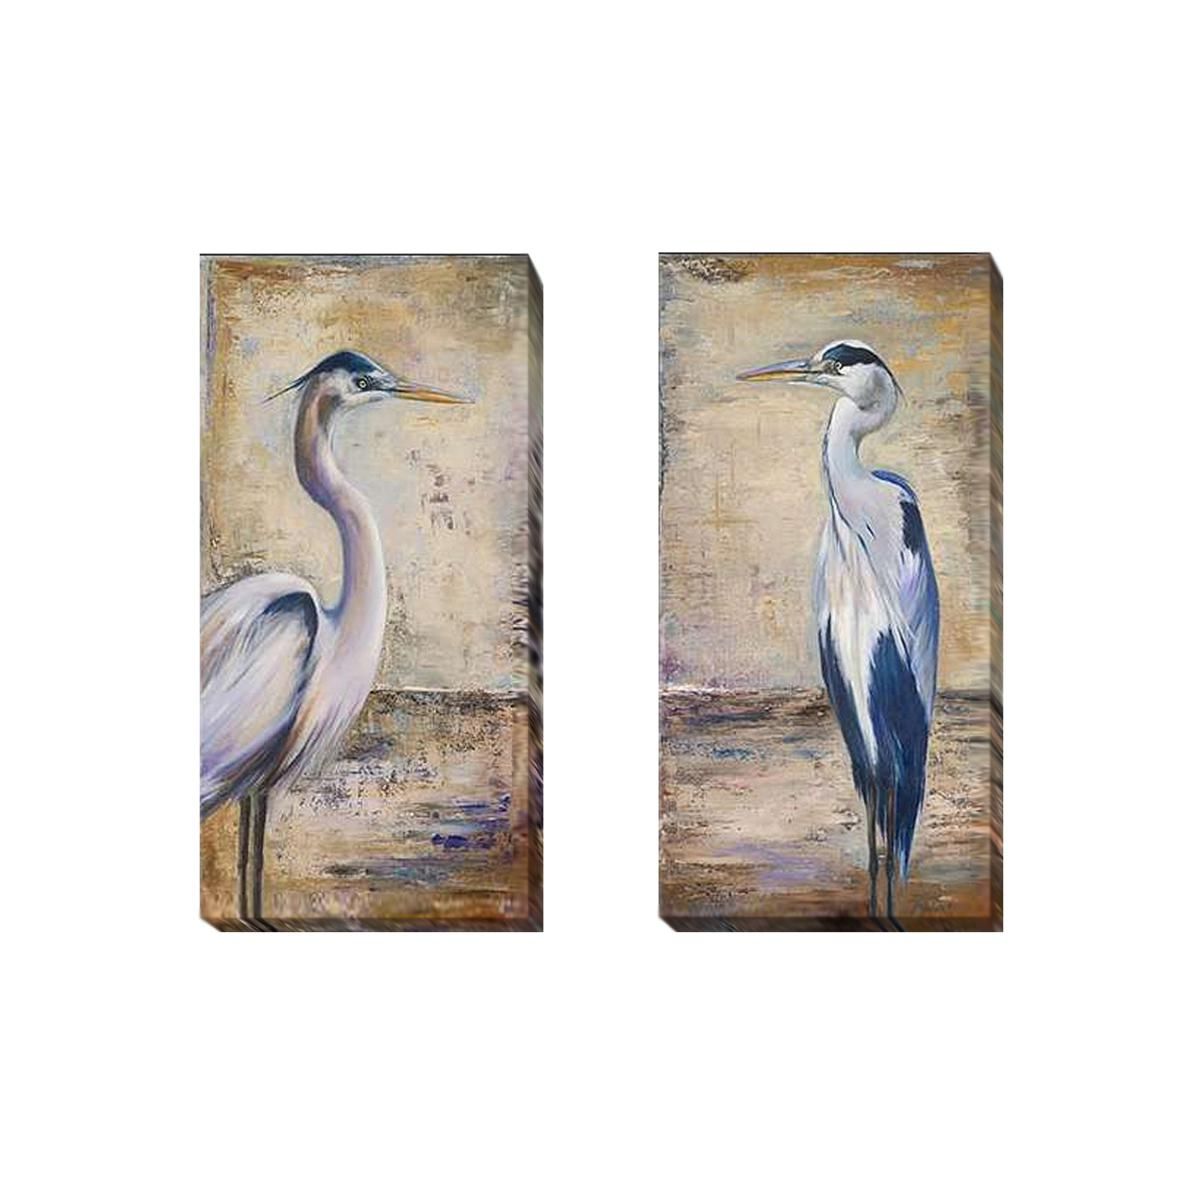 "Blue Heron" by Pinto 2-piece Gallery-Wrapped Canvas Giclee Set - Large - 8194085 | HSN | HSN